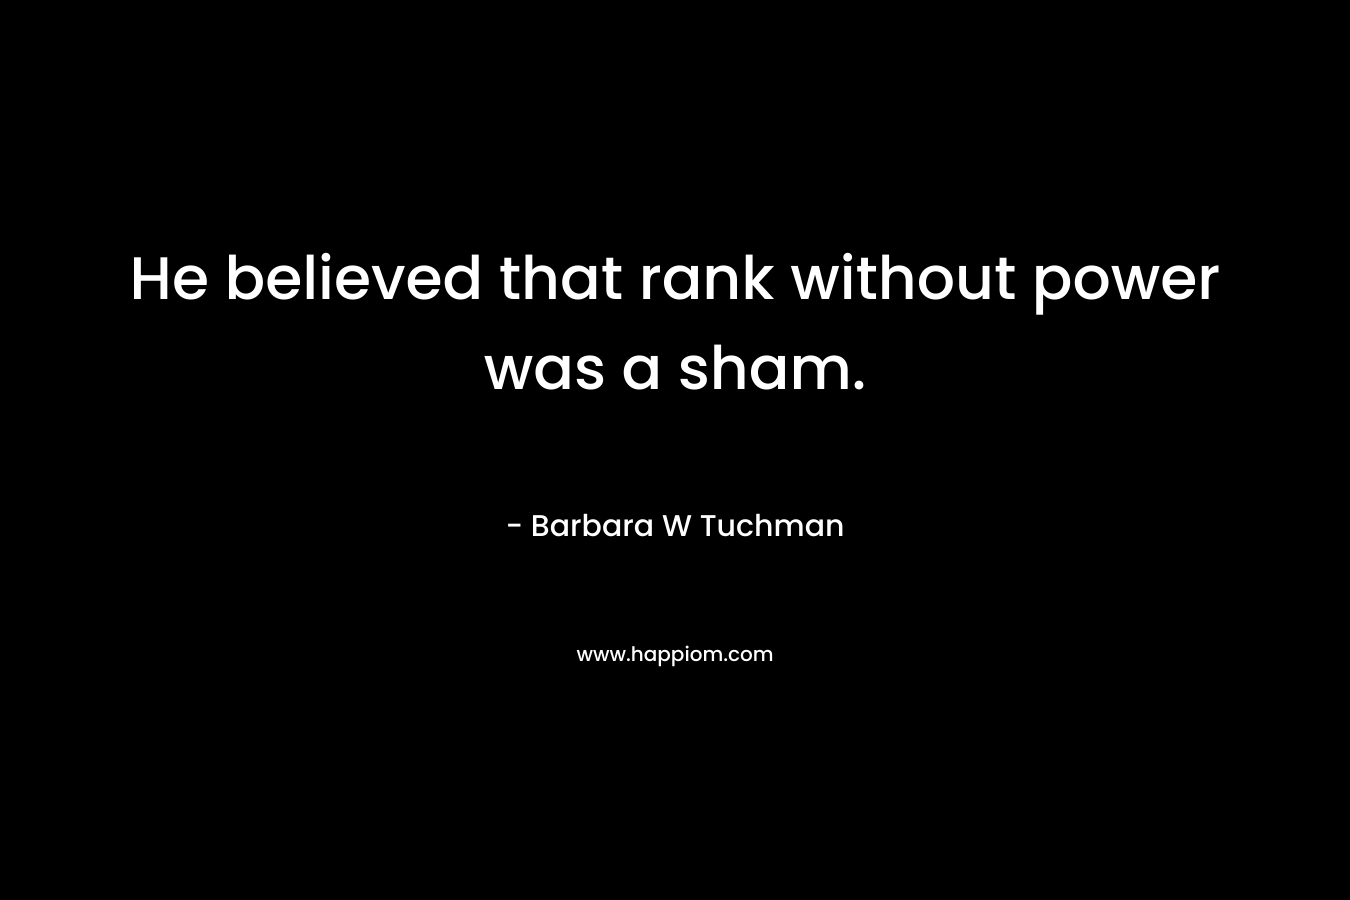 He believed that rank without power was a sham. – Barbara W Tuchman